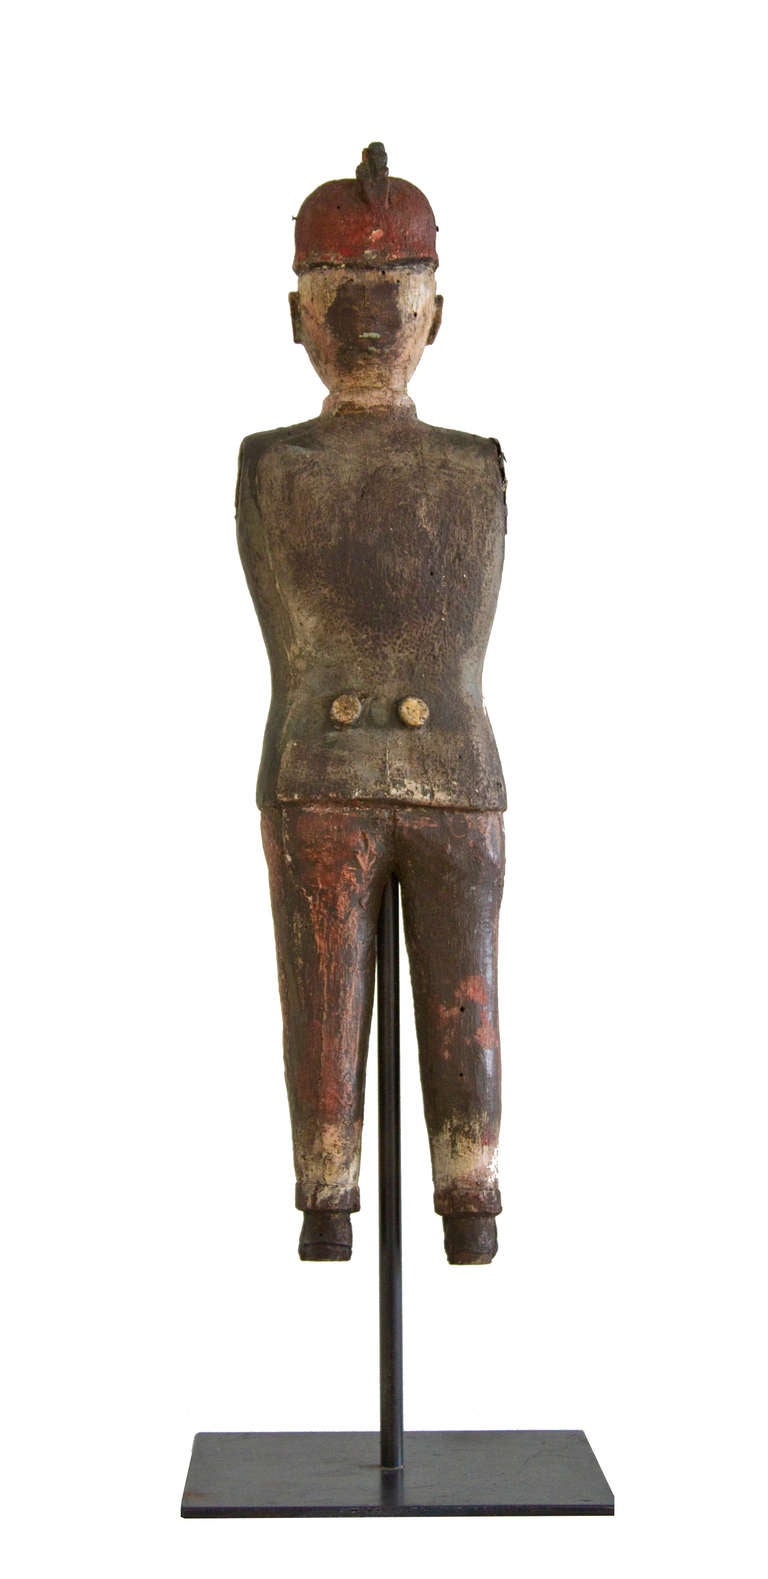 Hand carved wooden figure of a mid 19th century fireman.  The feet and paddles are long gone. Applied wooden buttons adorn both sides of his uniform.  Original painted and weathered surface with pleasing craquelure on his coat and trousers. 